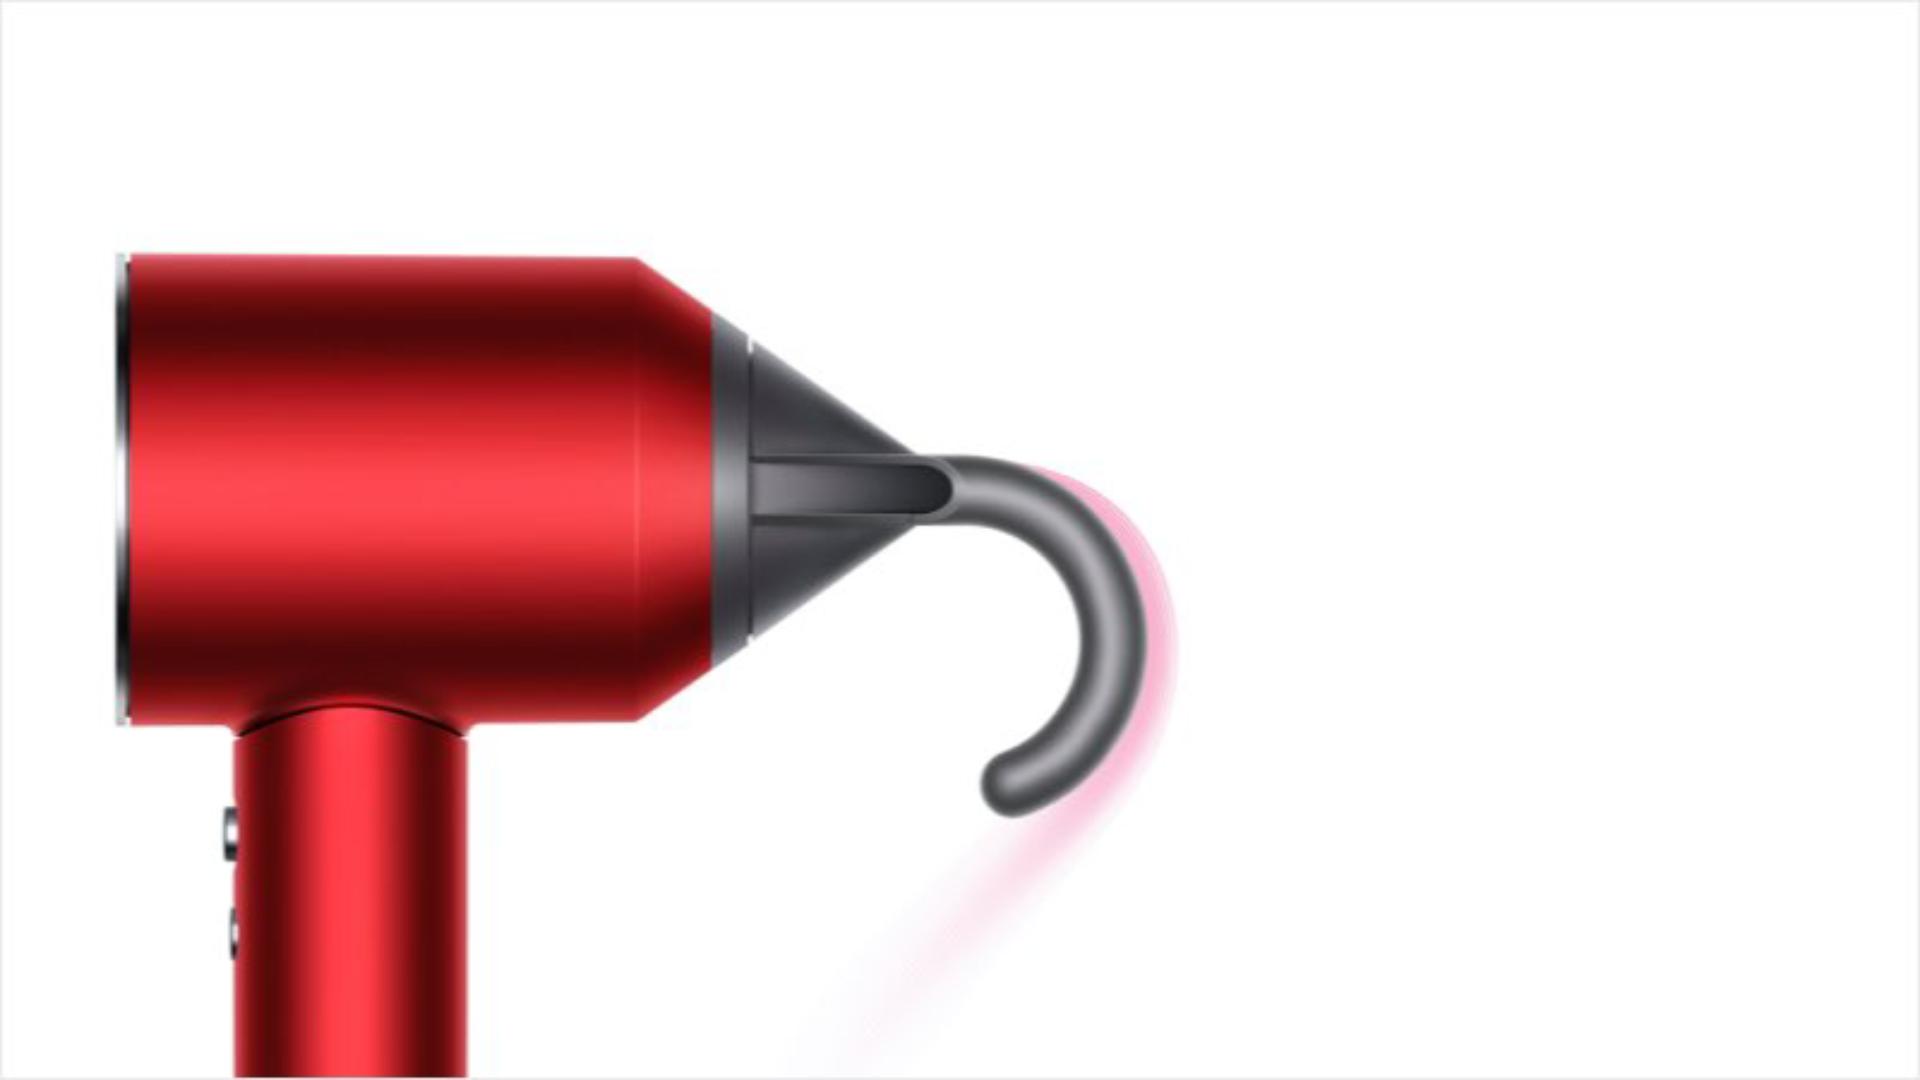 Dyson Supersonic™ hair dryer with New Flyaway attached